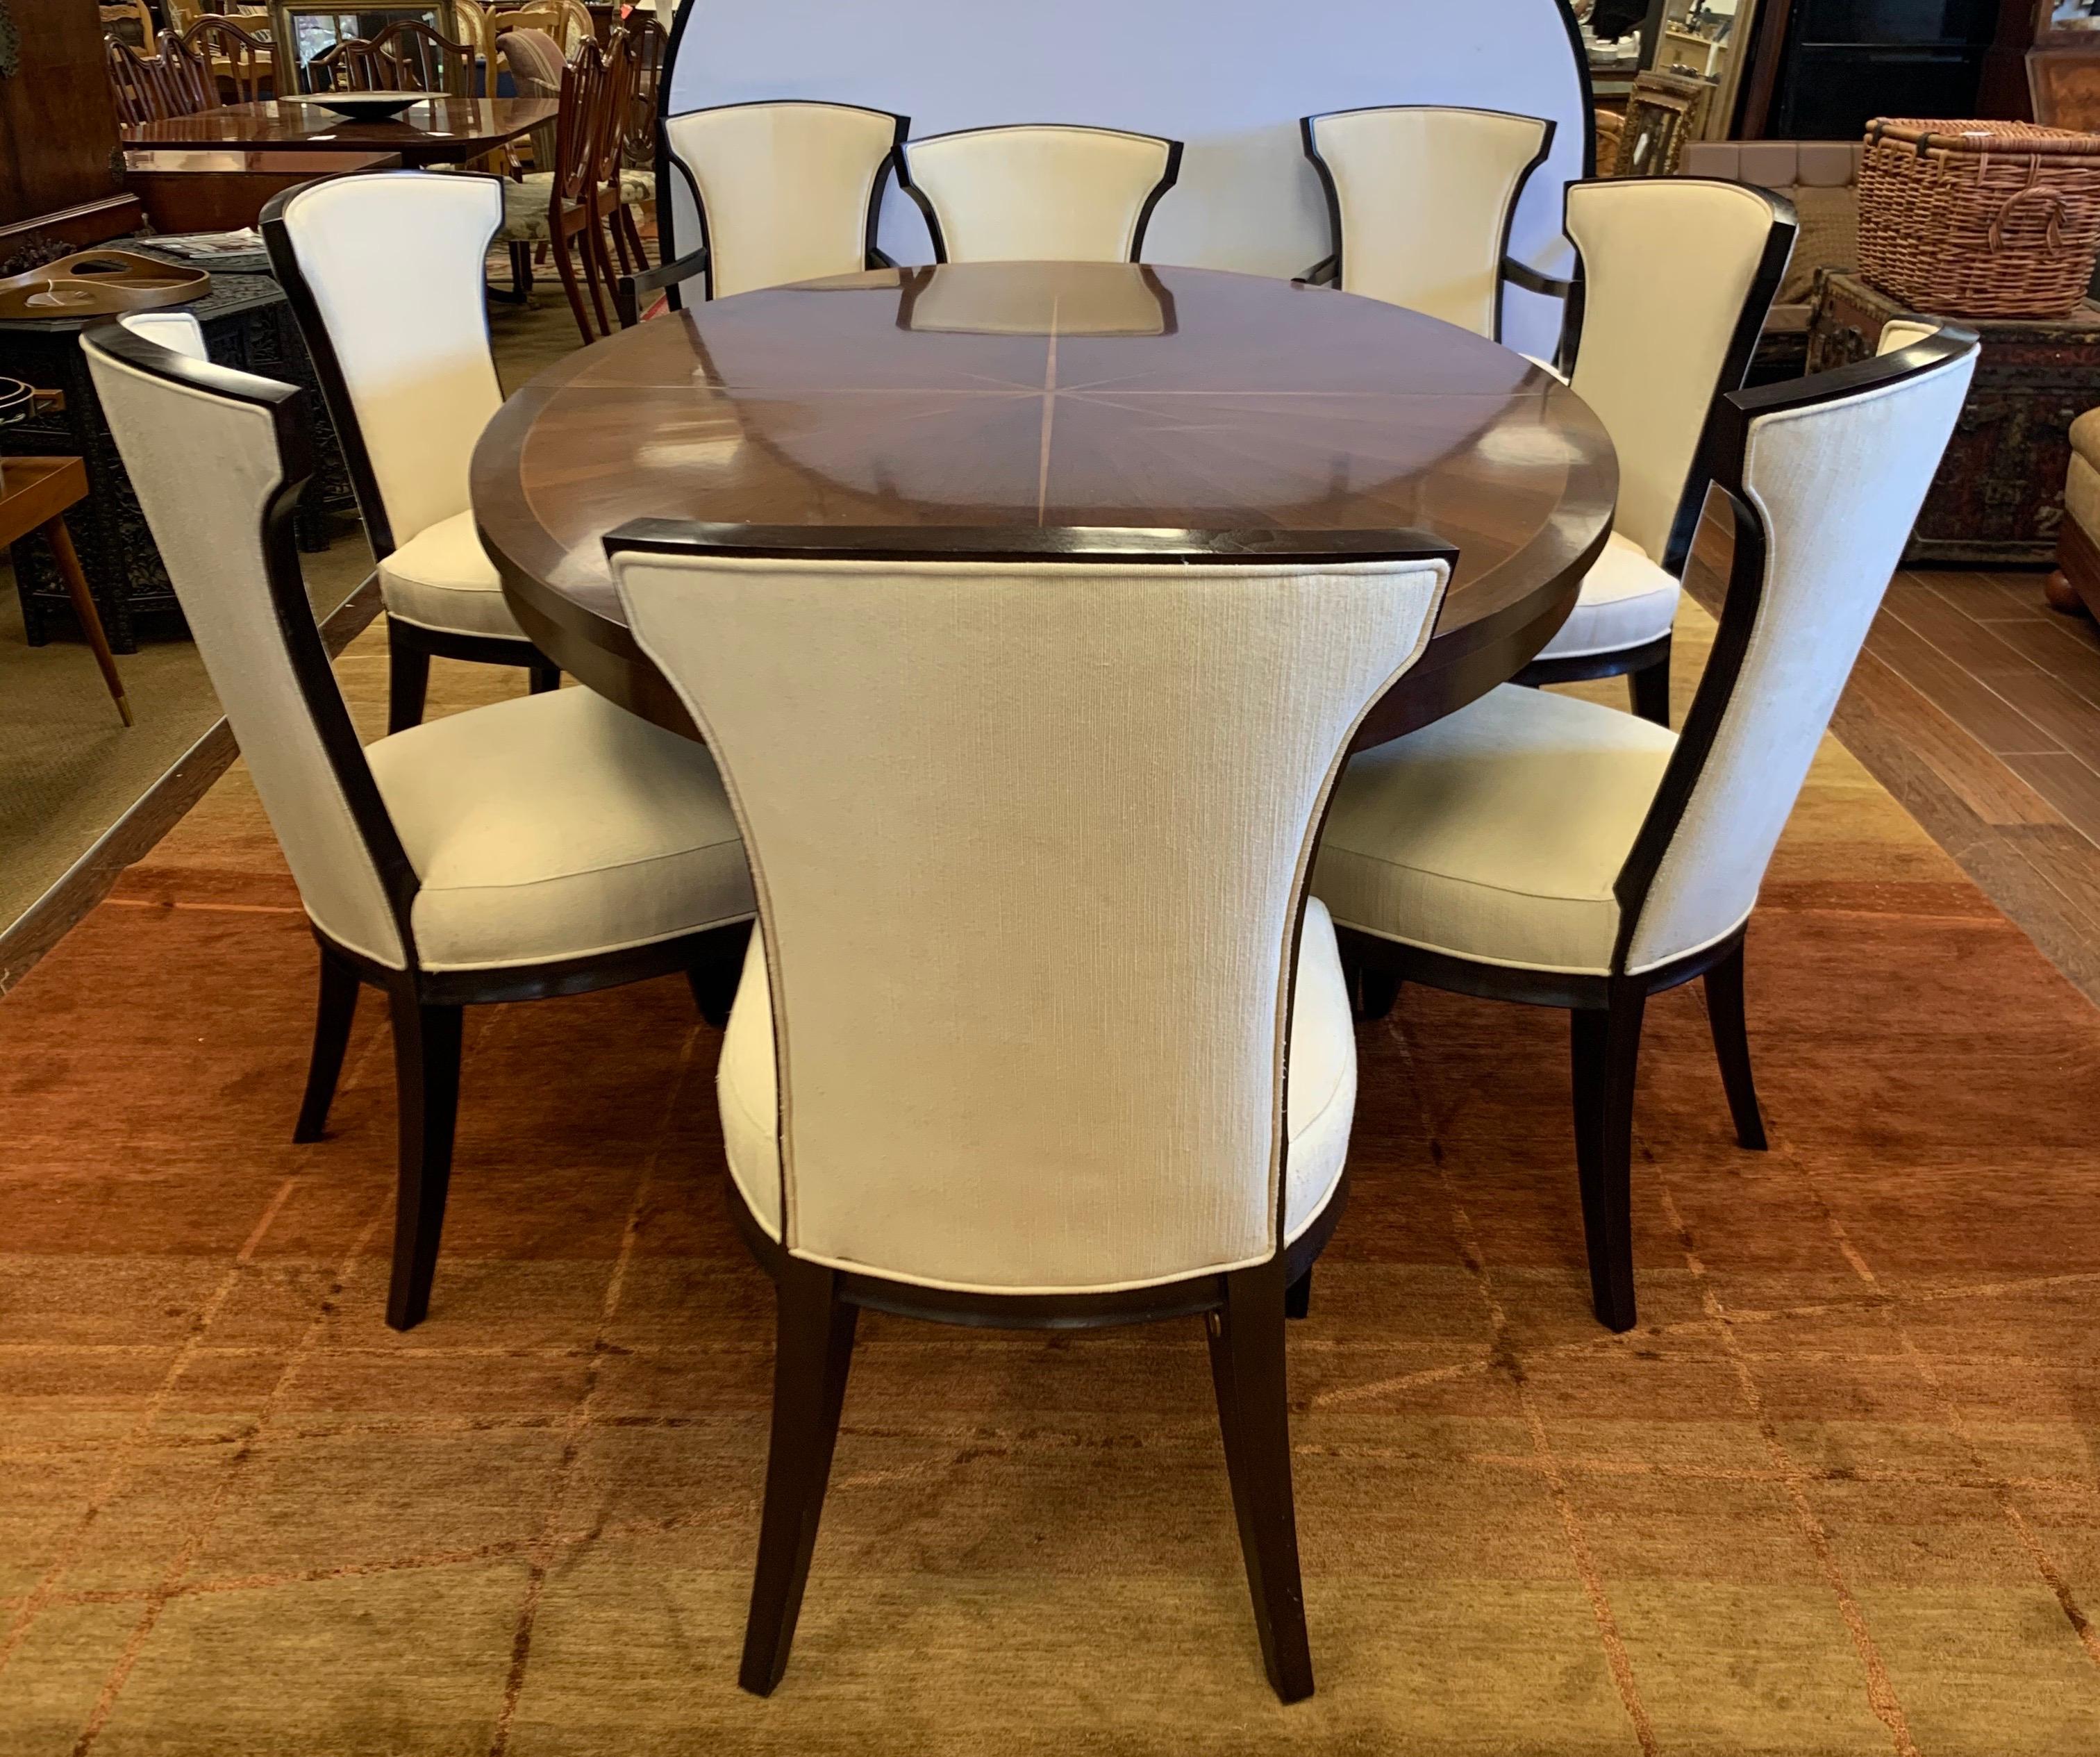 A stunning Barbara Barry for Henredon furniture celestial walnut oval dining table and matching chairs. Barry's unflinching eye towards craftsmanship and quality have made her furniture design for Henredon and Baker coveted throughout the world. The